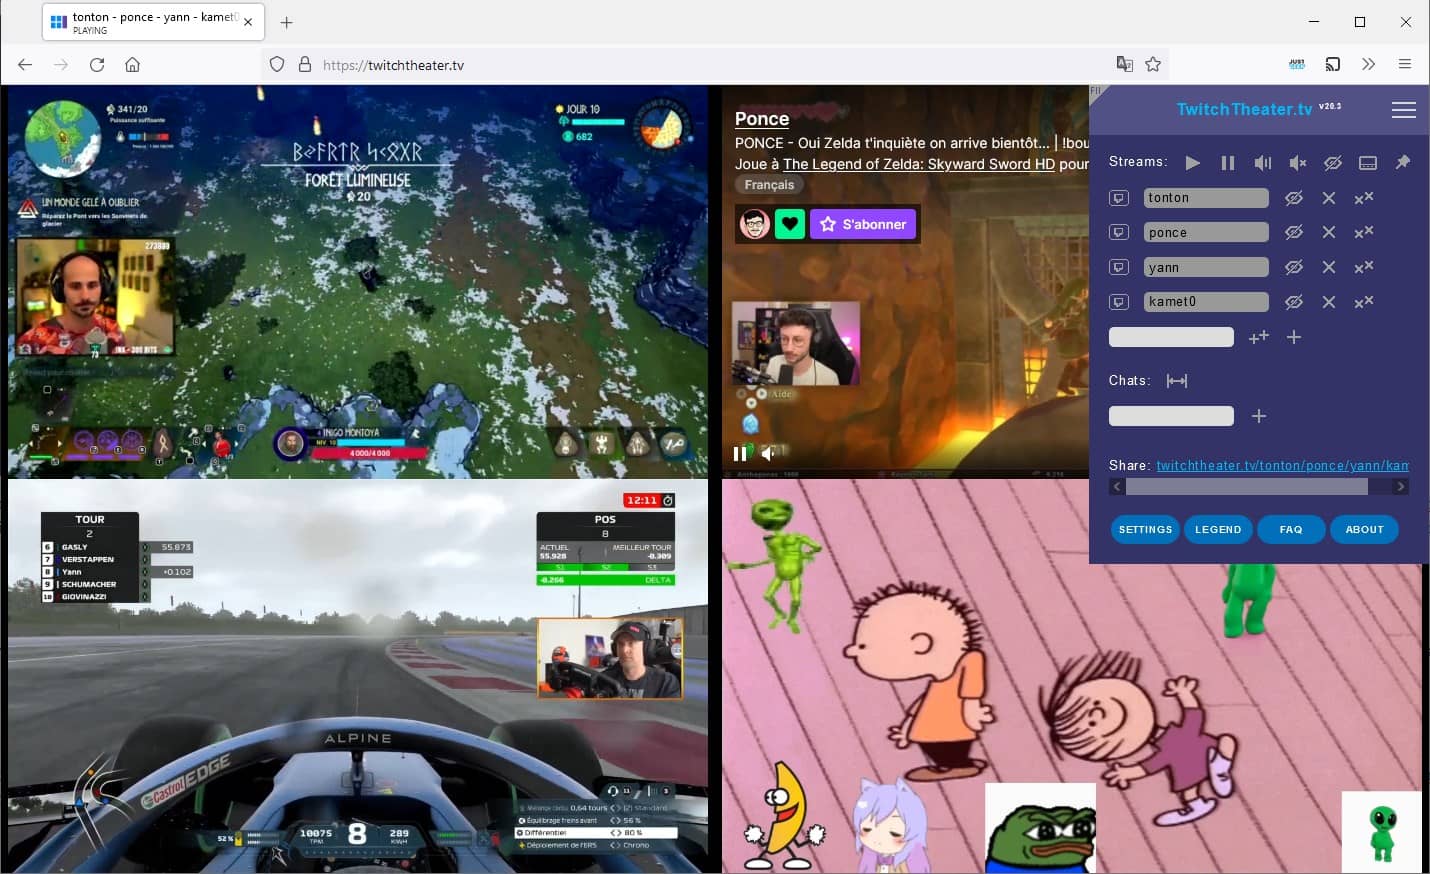 Twitchtheater : multistream Twitch, YouTube ou autres